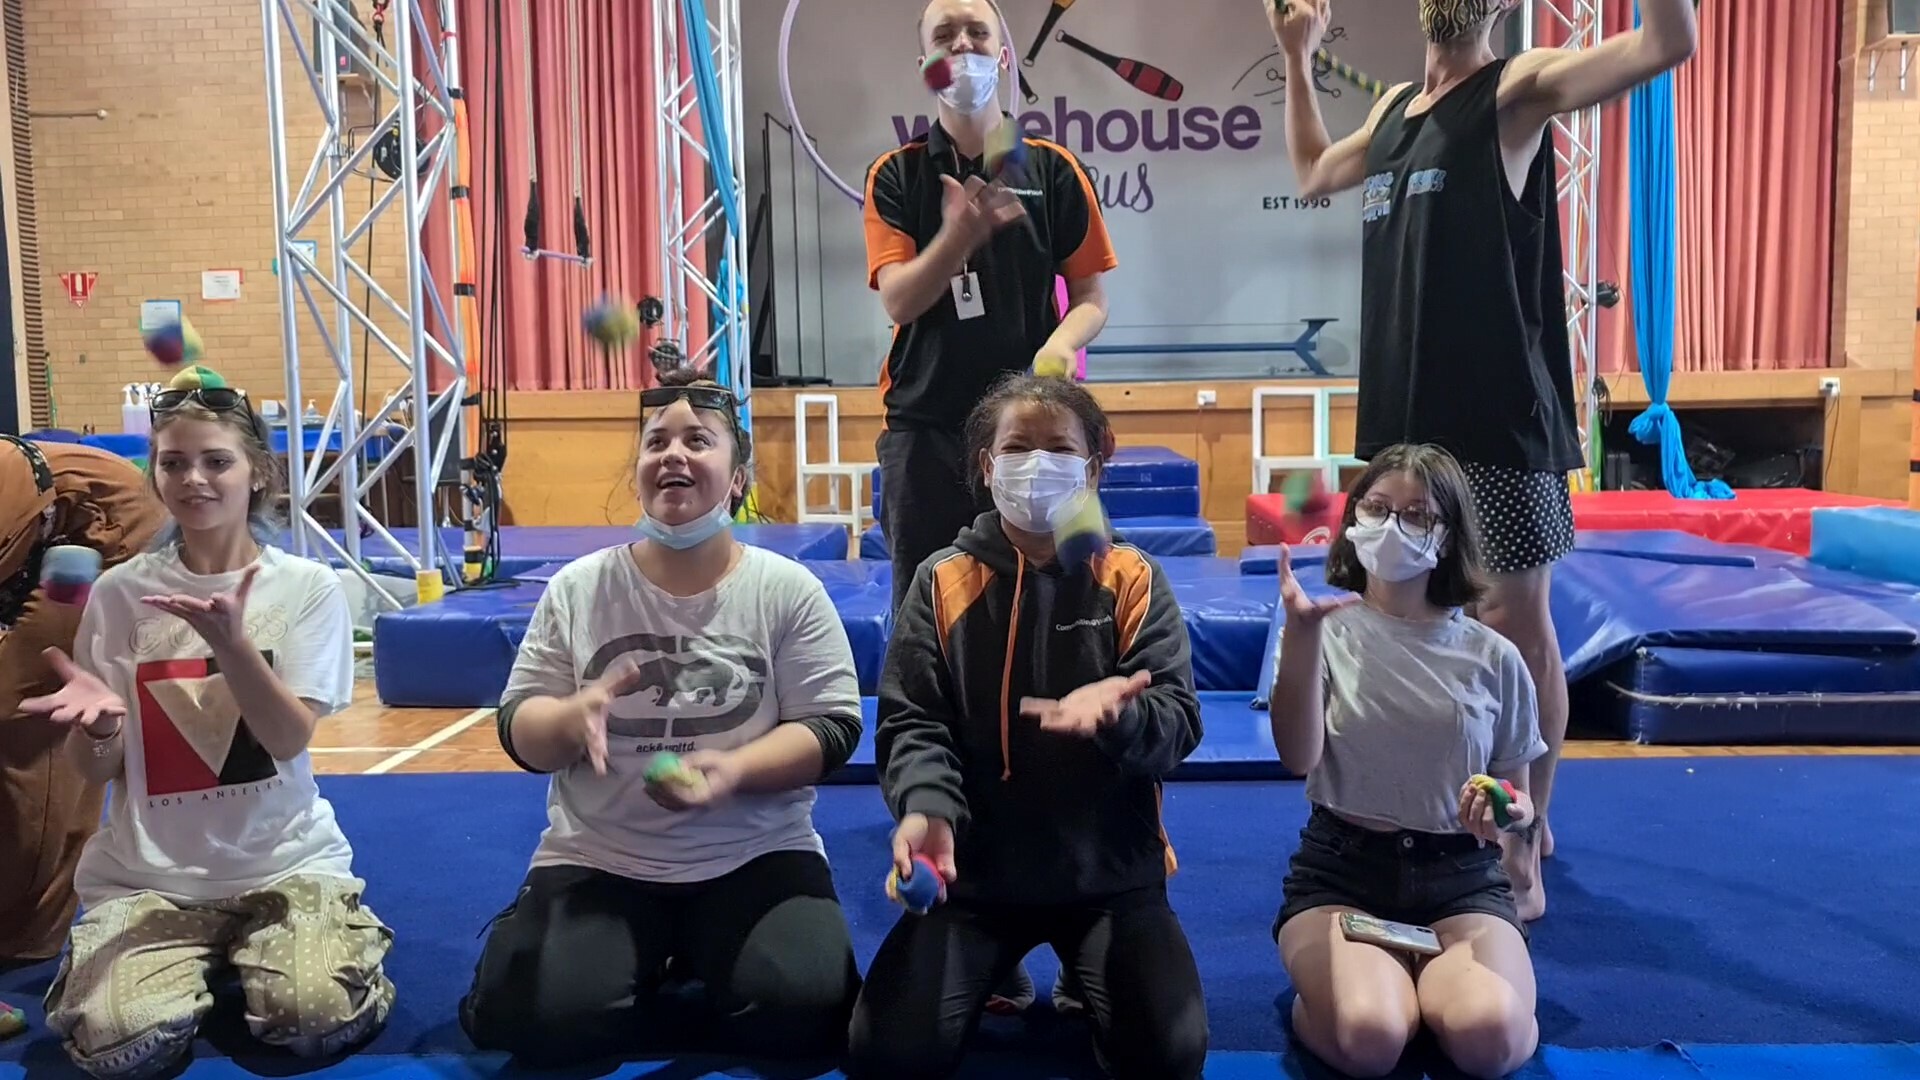 Galilee School students go to Warehouse Circus class